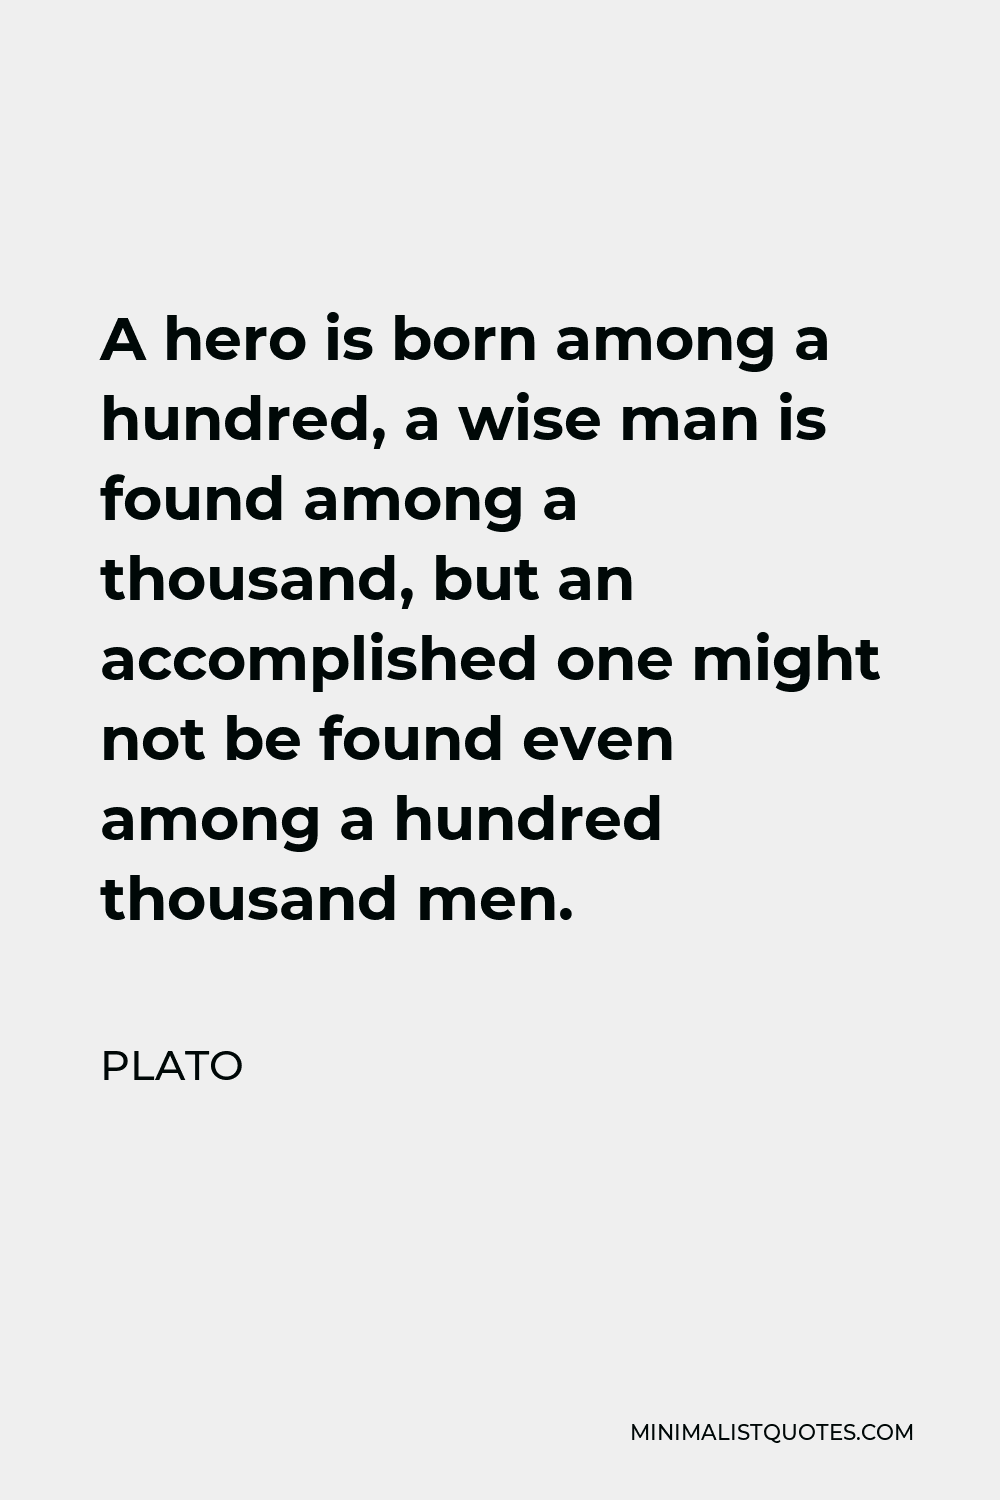 Plato Quote - A hero is born among a hundred, a wise man is found among a thousand, but an accomplished one might not be found even among a hundred thousand men.